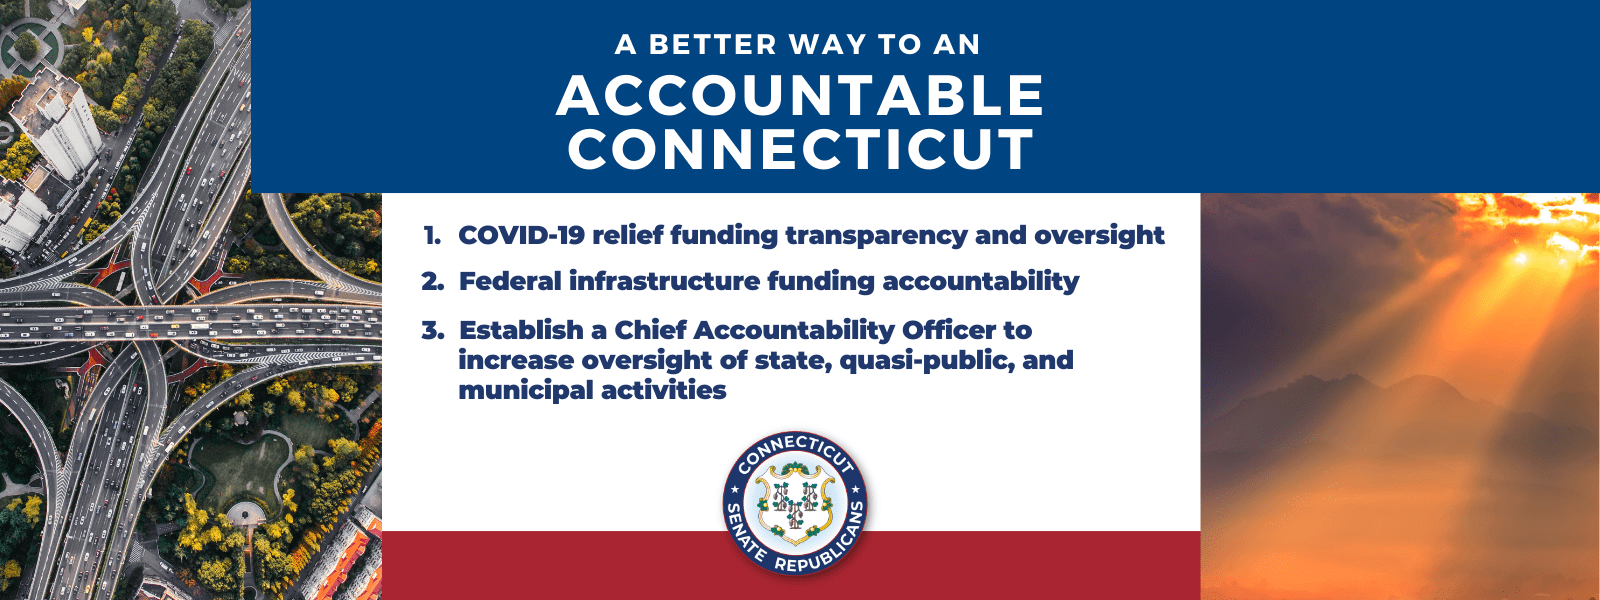 FOR IMMEDIATE RELEASE | Sen. Henri Martin Joins Senate Republican Call for Government Transparency & Accountability, Unveils Better Way to Accountable CT Plan